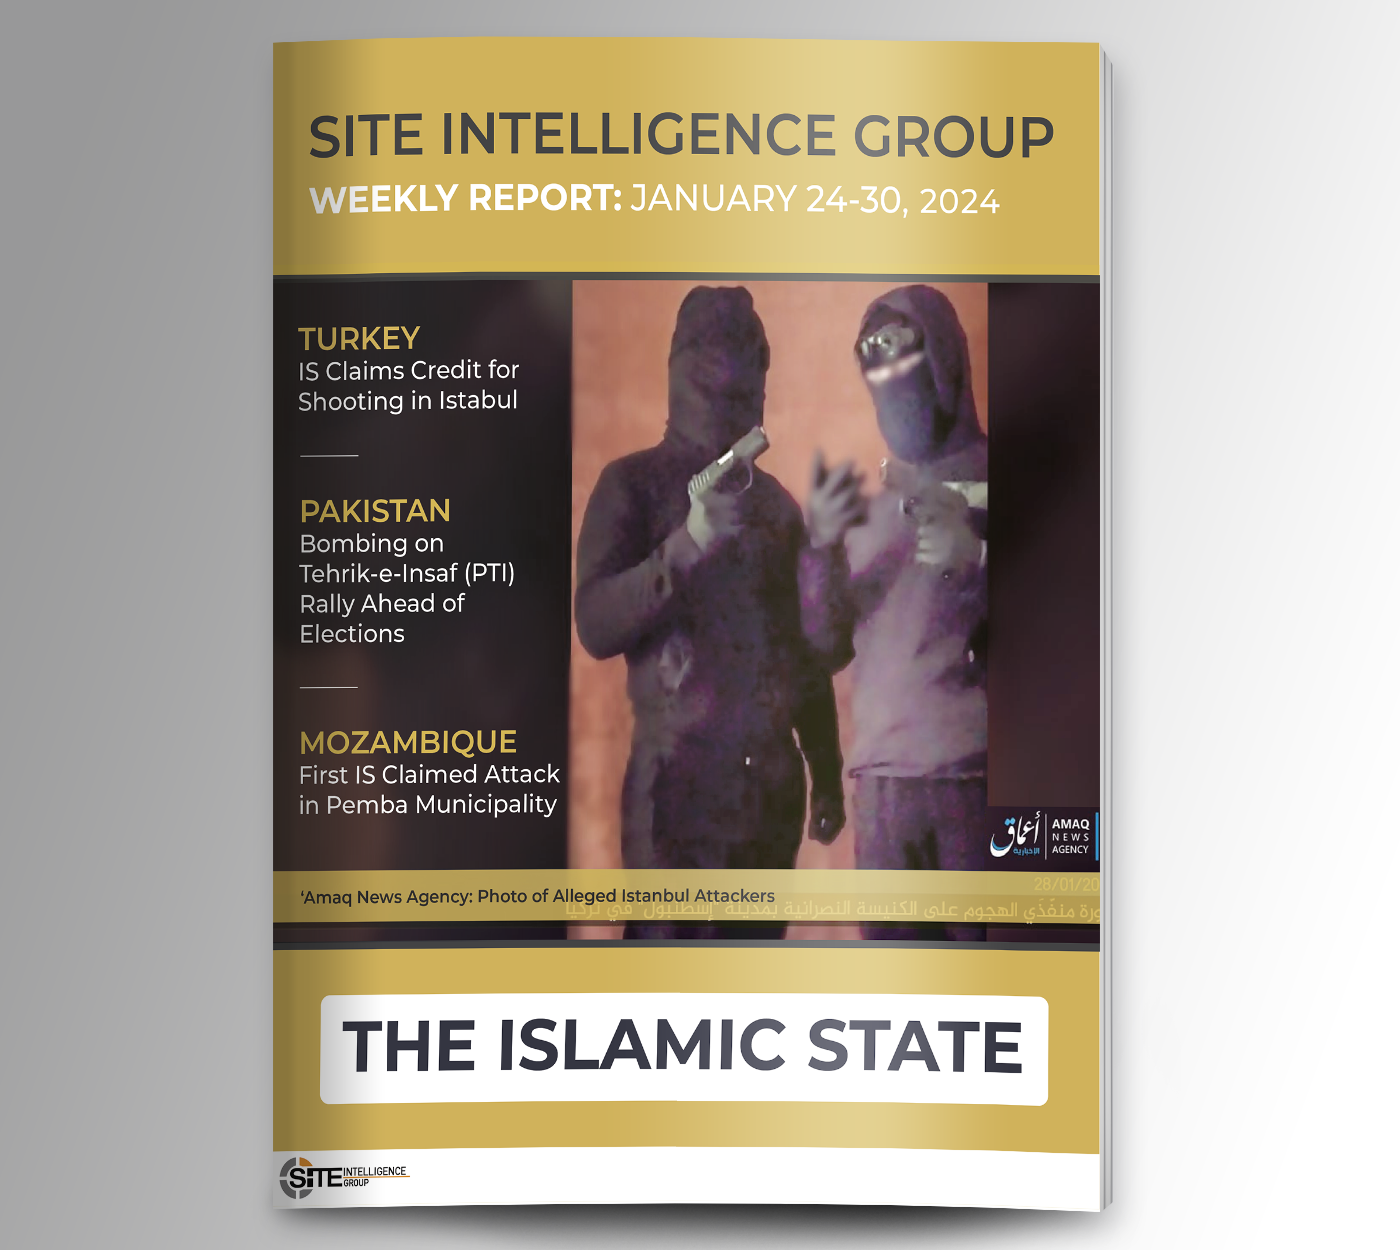 Weekly inSITE on the Islamic State for January 24-30, 2024